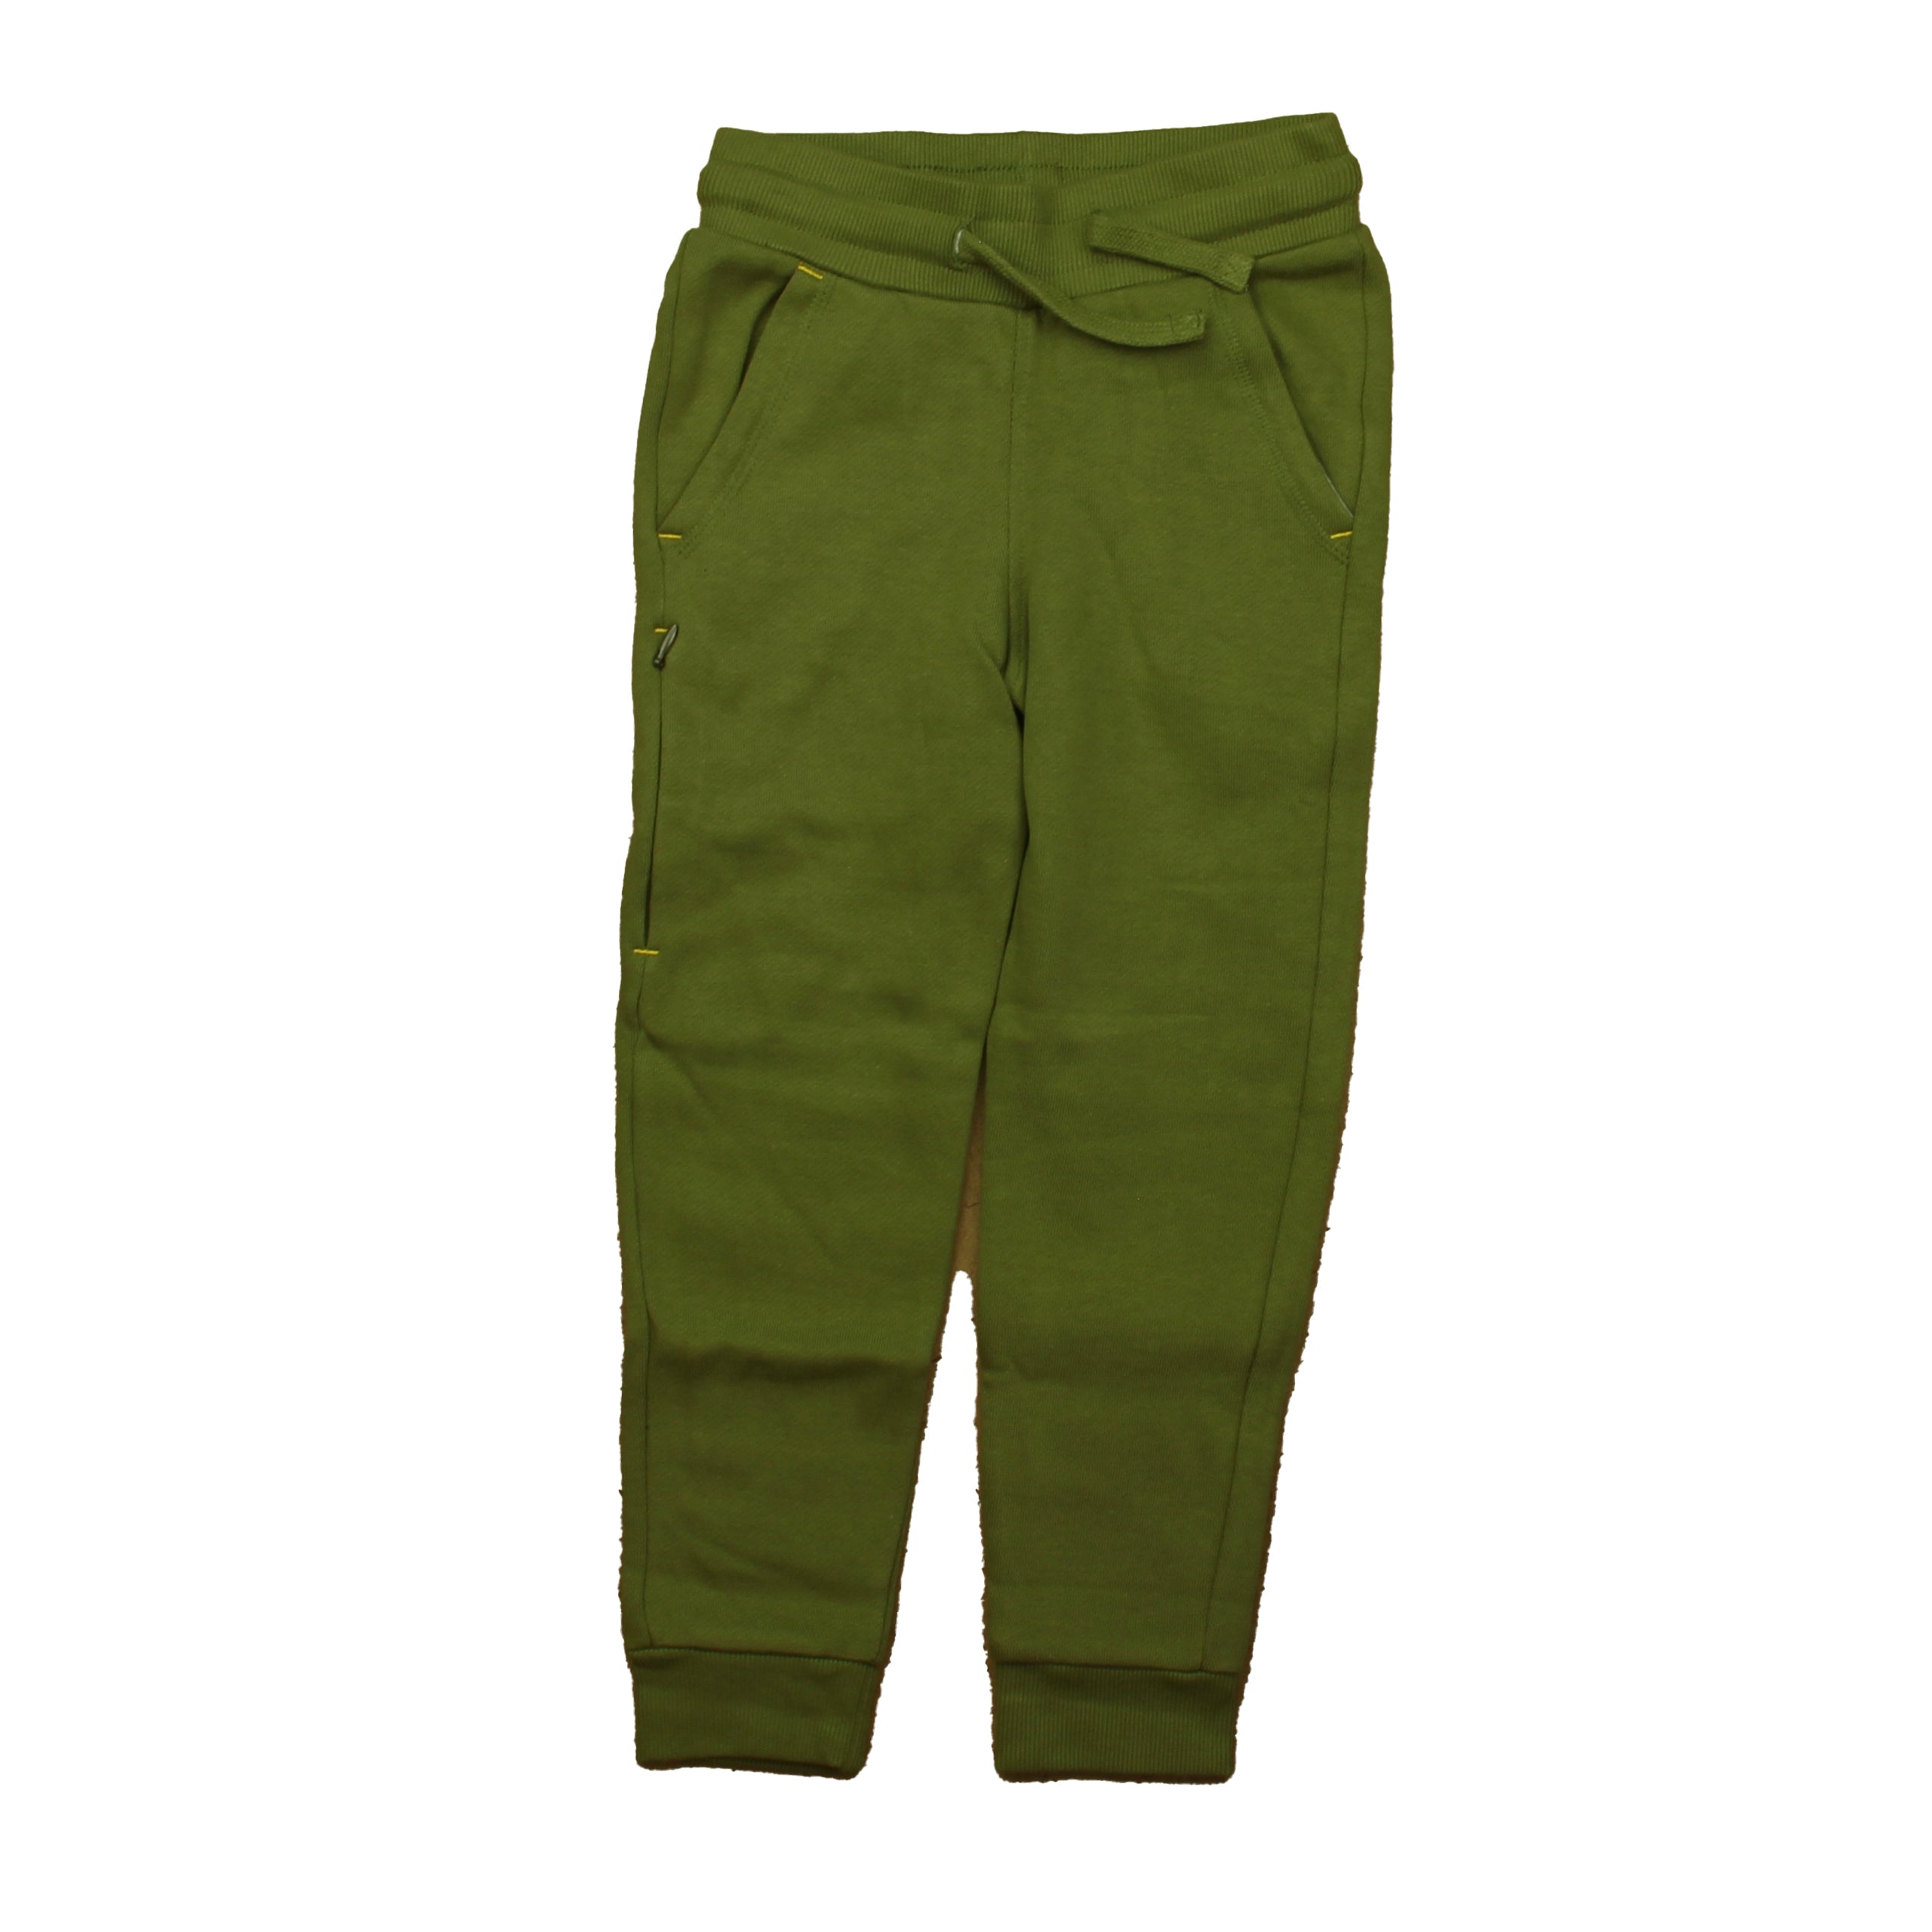 Pre-owned Green Pants size: 4T